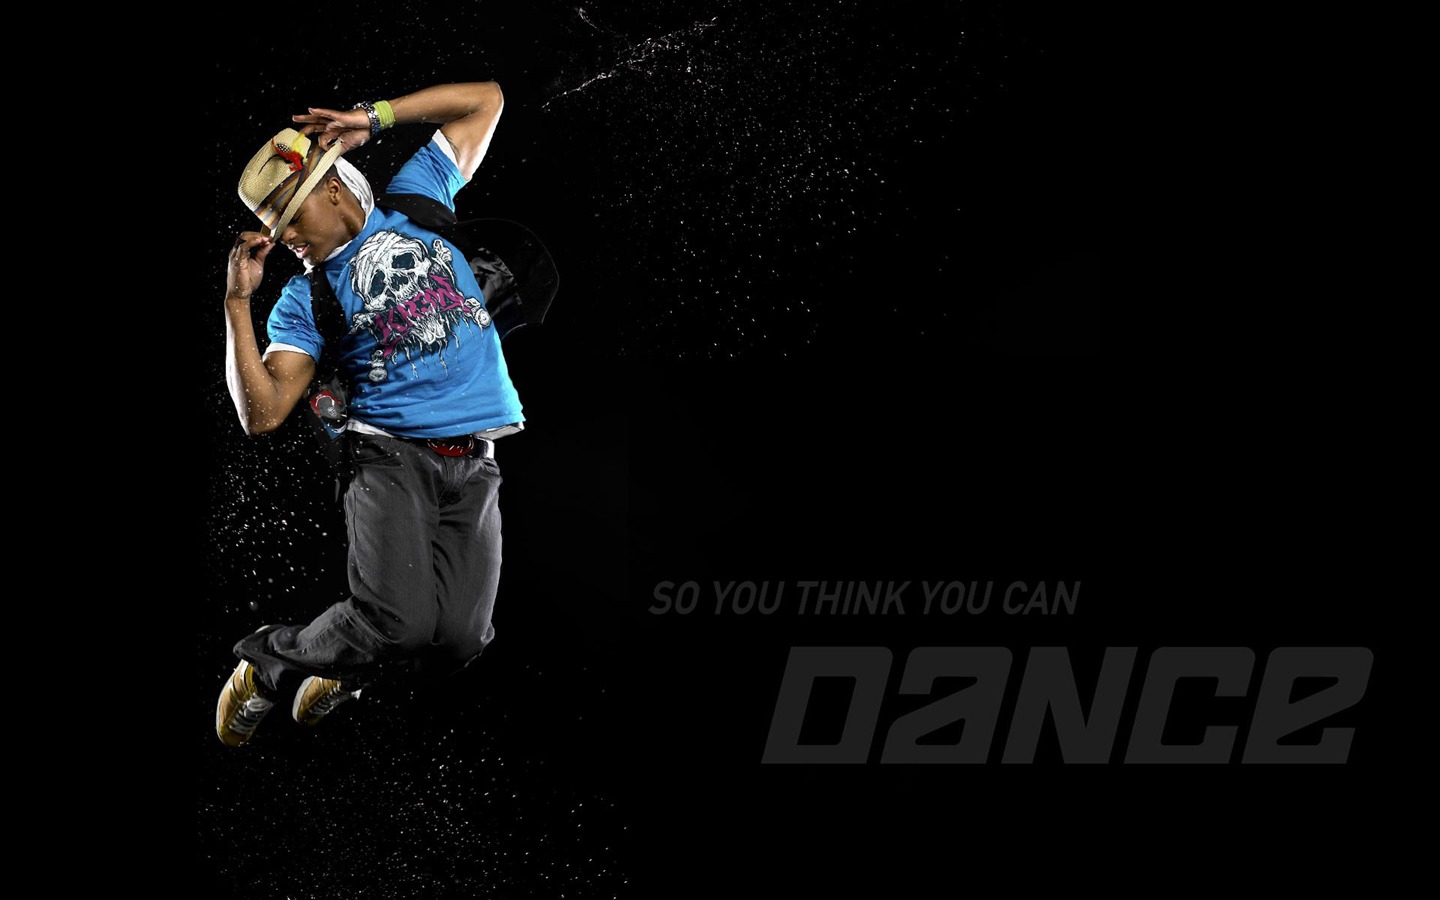 So You Think You Can Dance 舞林争霸 壁纸(一)20 - 1440x900